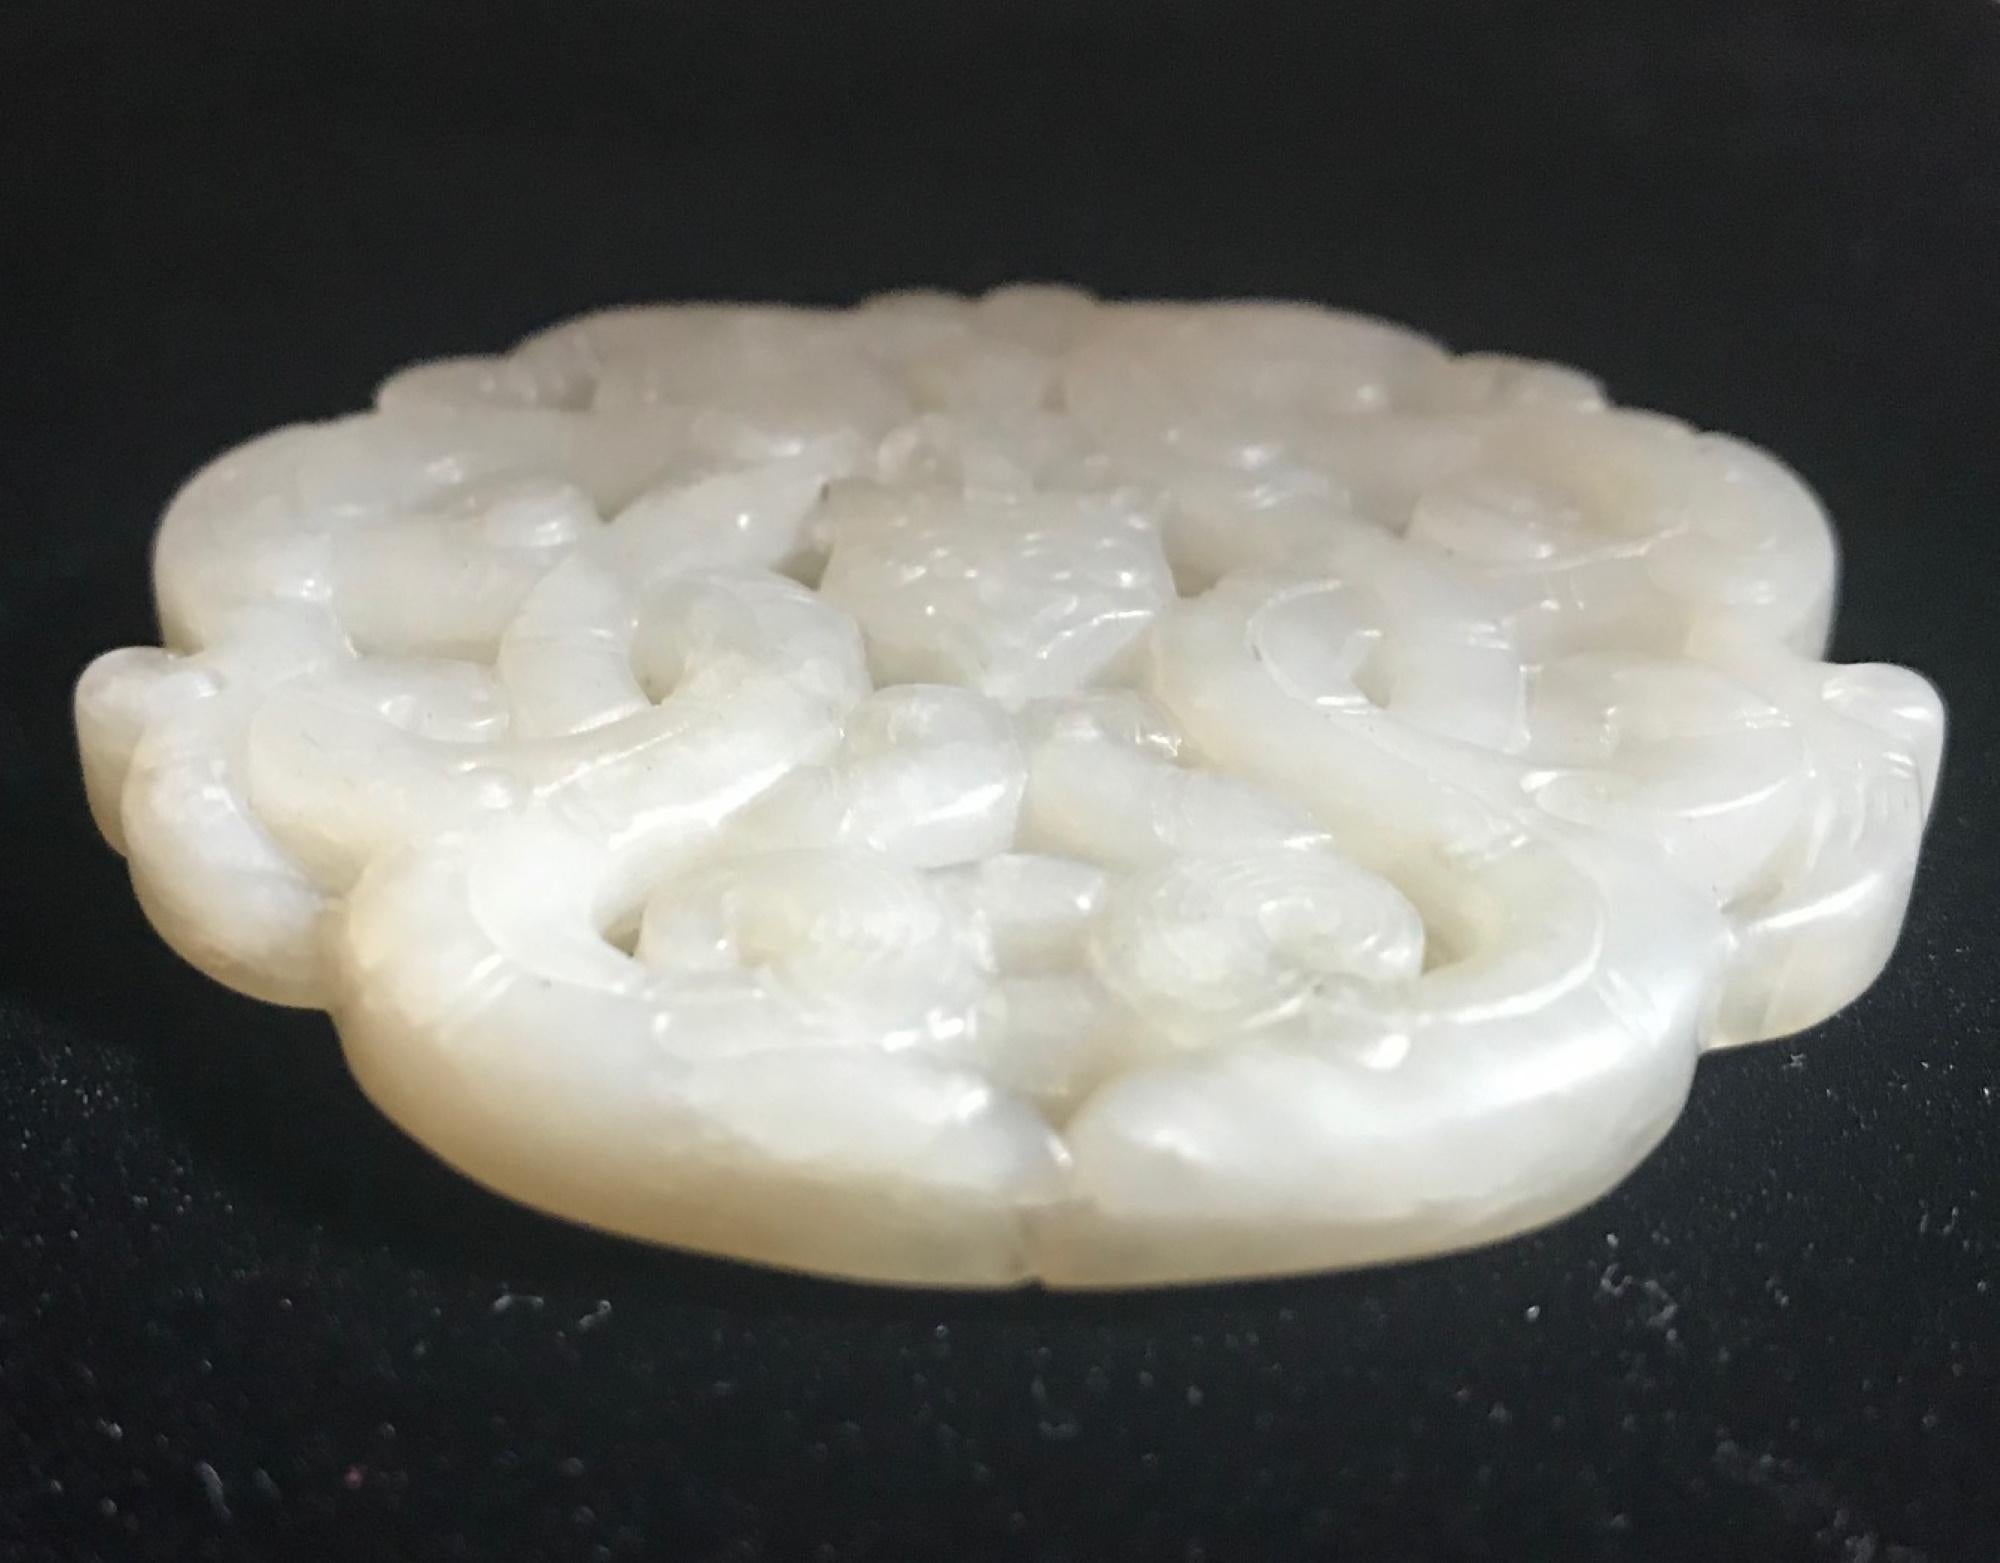 This Qing dynasty detailed carving of glowing jade is pierced and incised throughout with an intricate and balanced design. The medallion features dragons intertwined and centered on a crest. Both sides are beautifully and finely carved.

Condition: